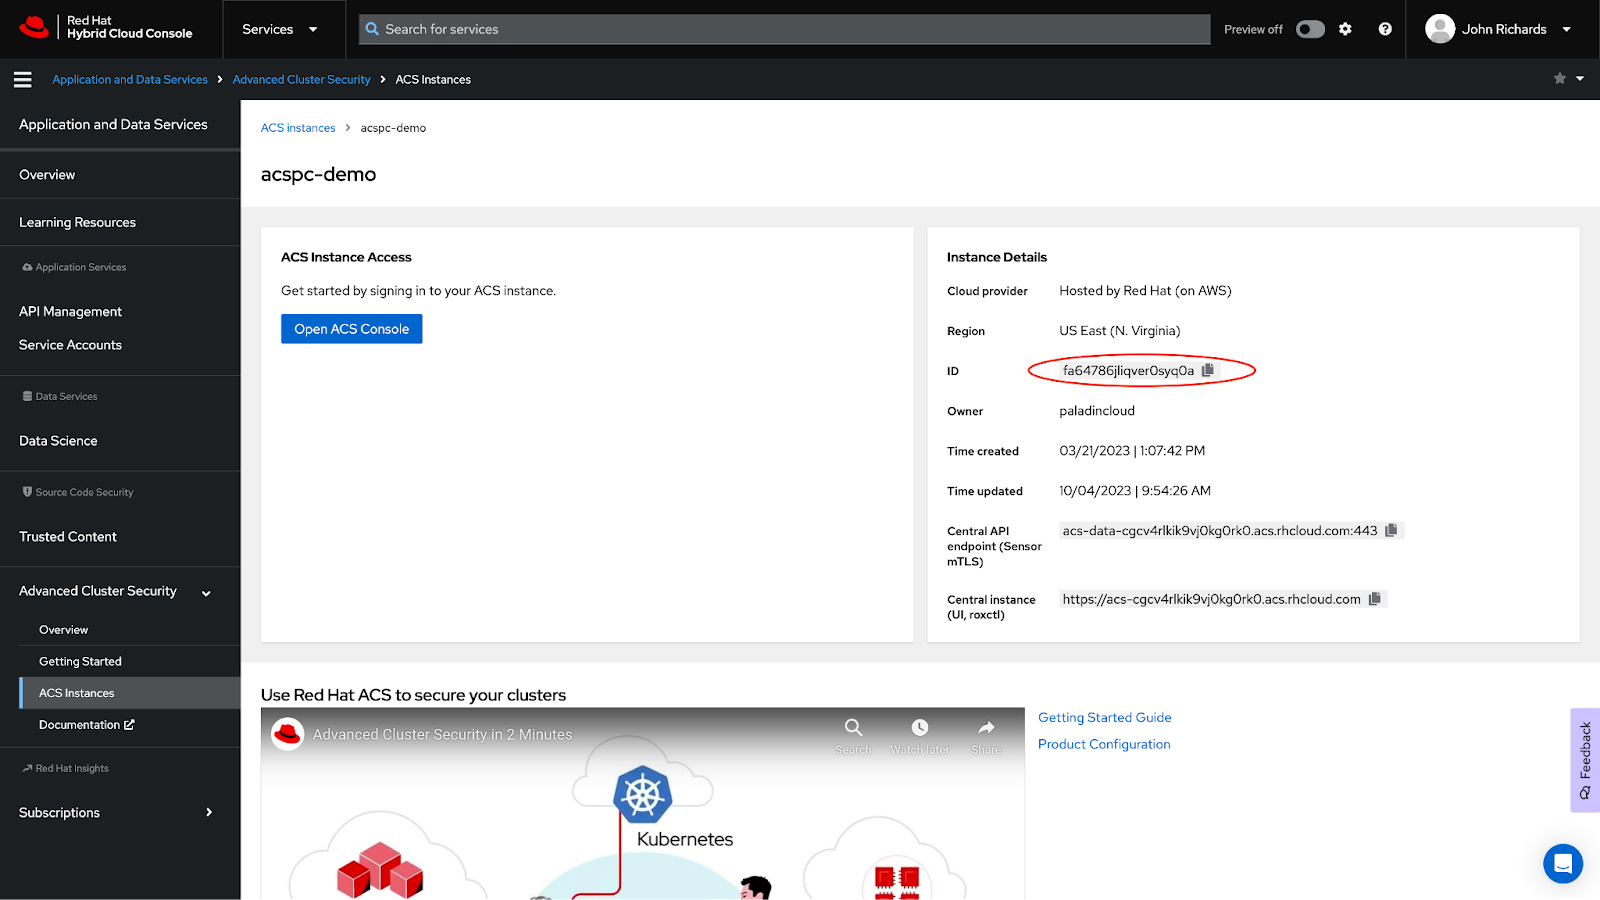 A screenshot of Red Hat ACS showing where to find the ACS Instance ID